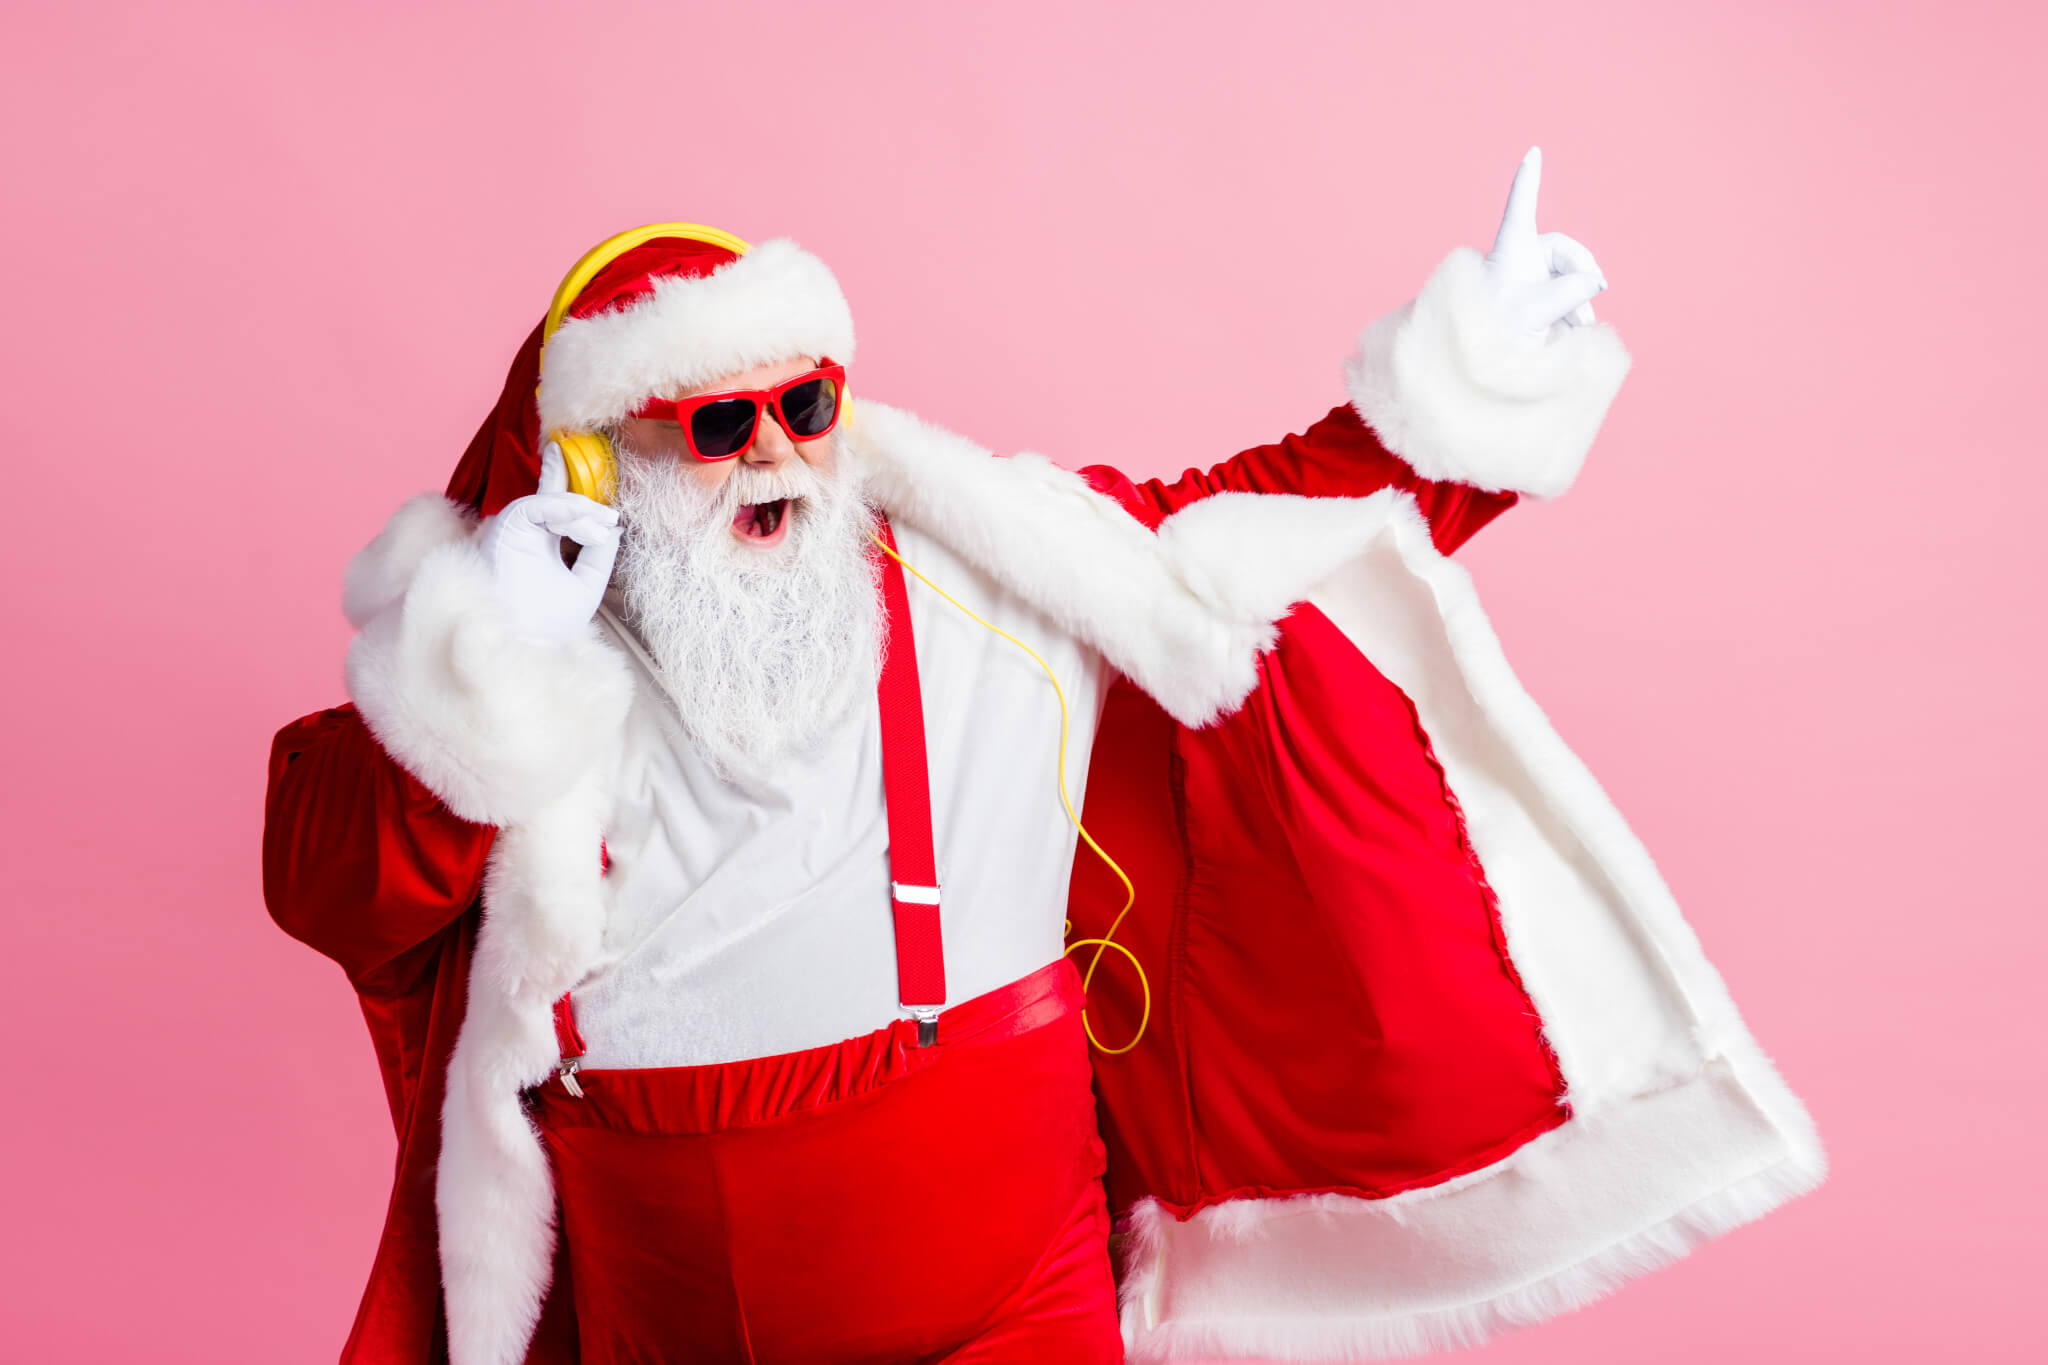 Santa Claus listening to music on his headphones, dancing to Christmas songs